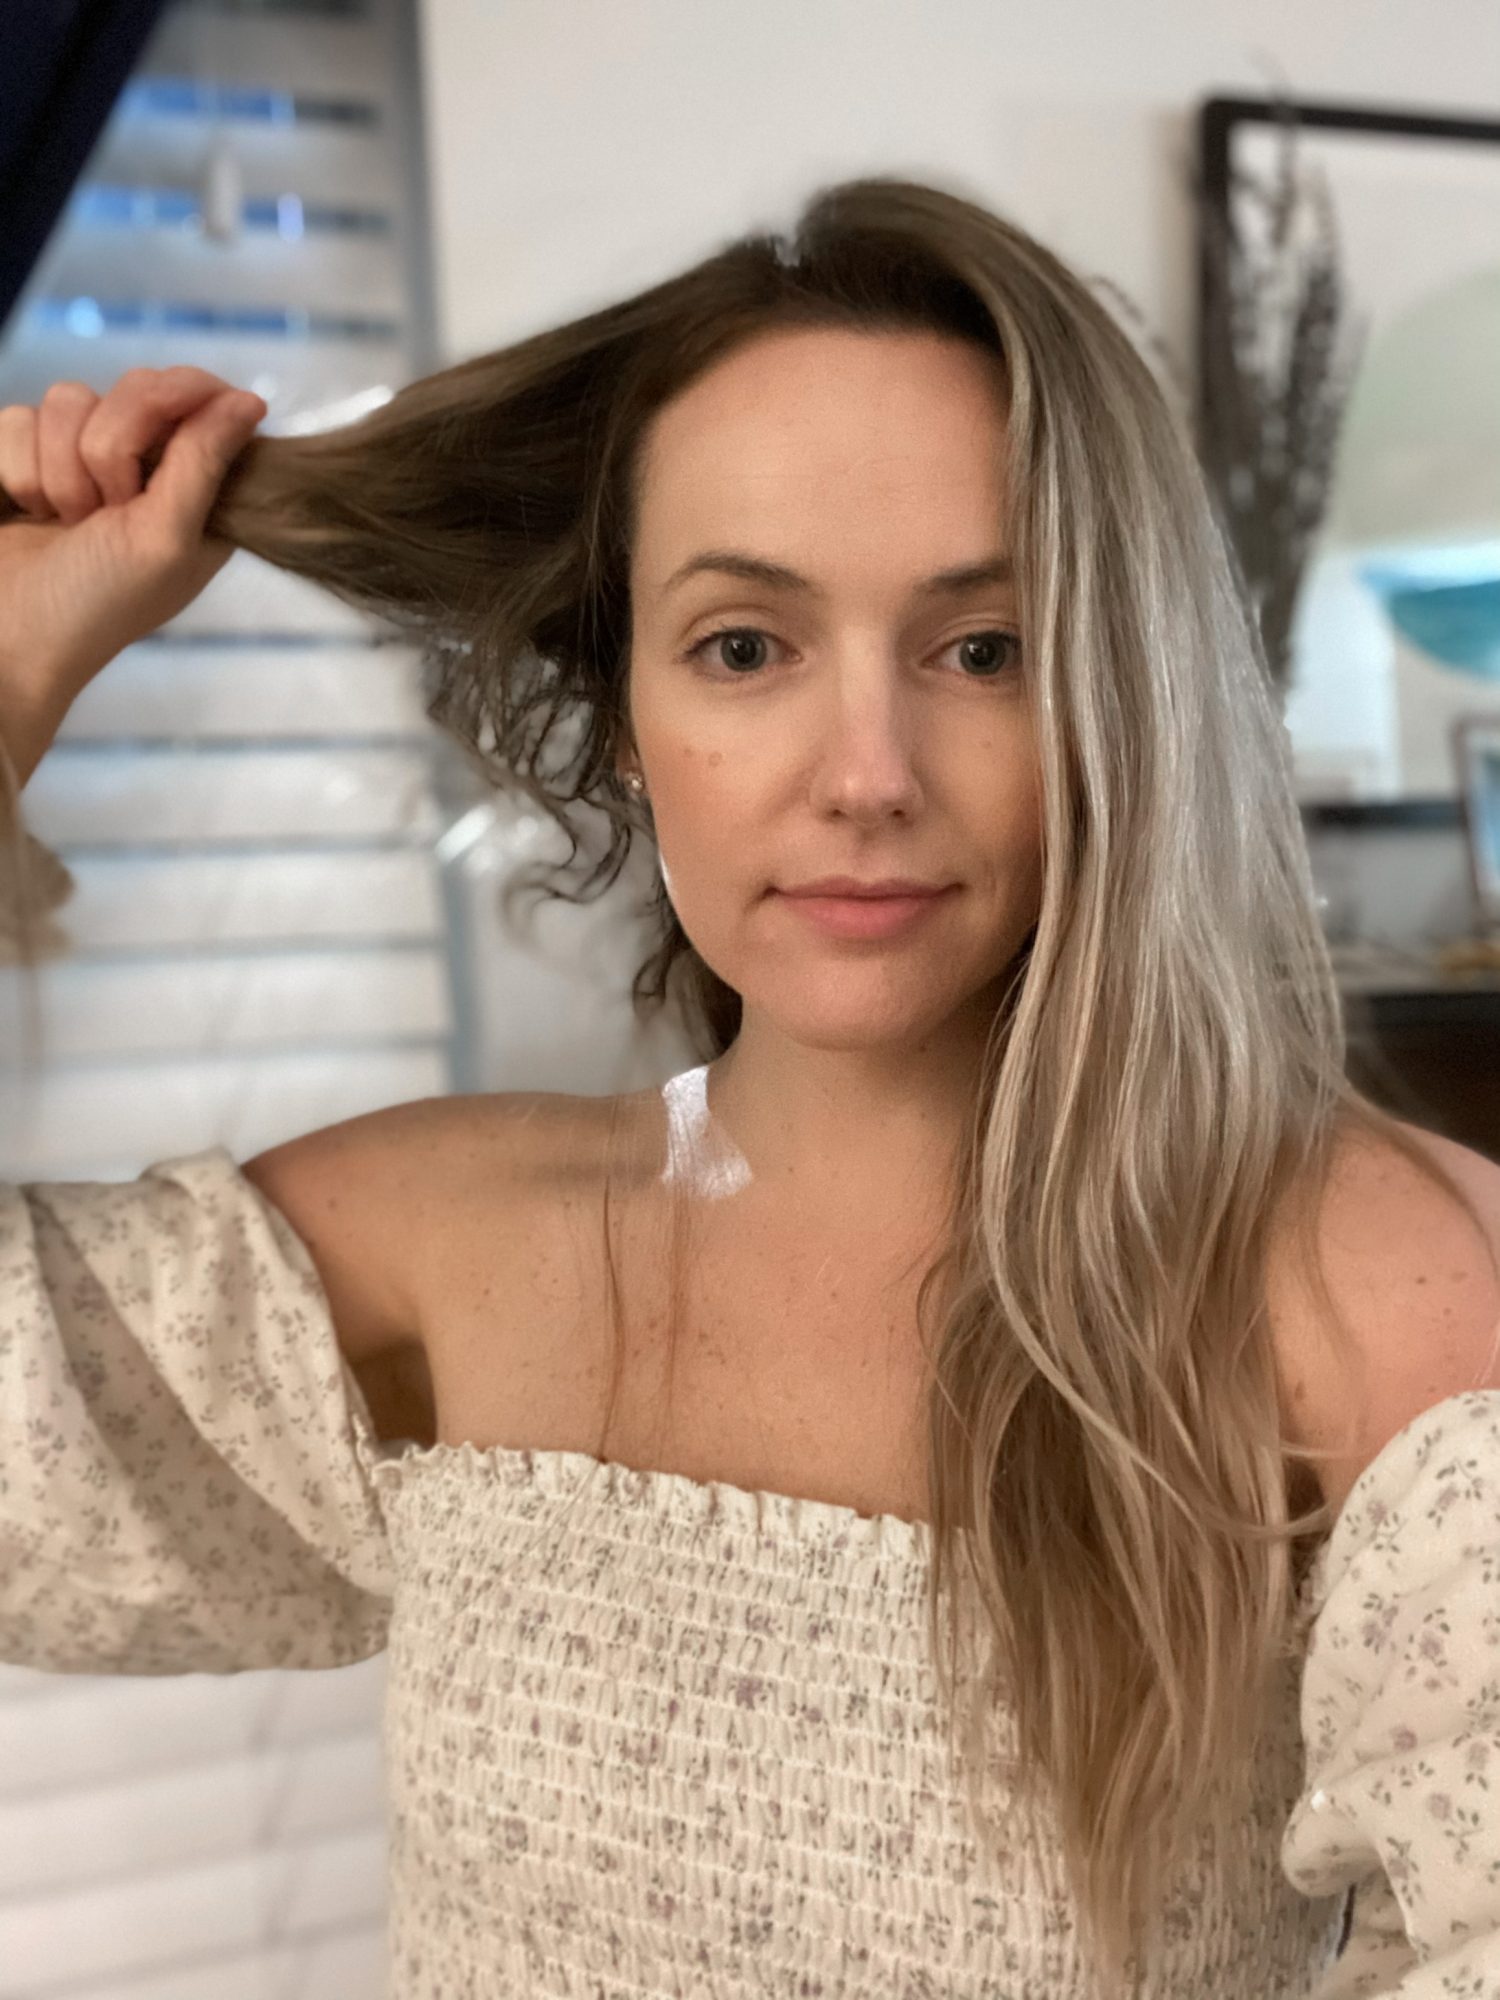 Is Postpartum Hair Loss Normal? Here's What To KnowHelloGiggles